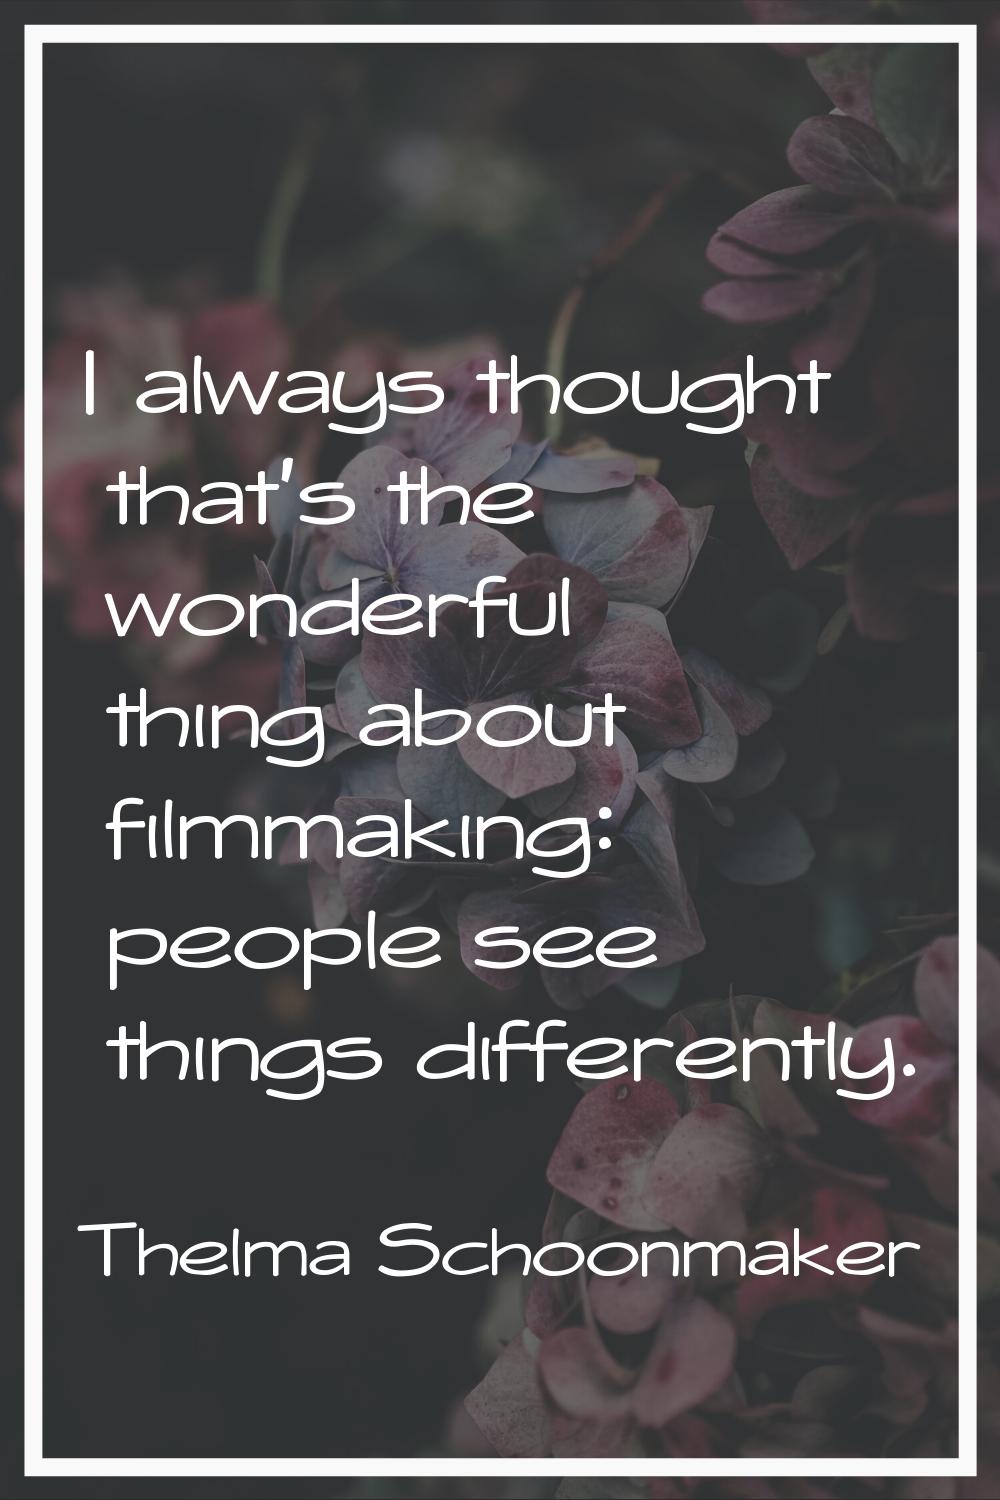 I always thought that's the wonderful thing about filmmaking: people see things differently.